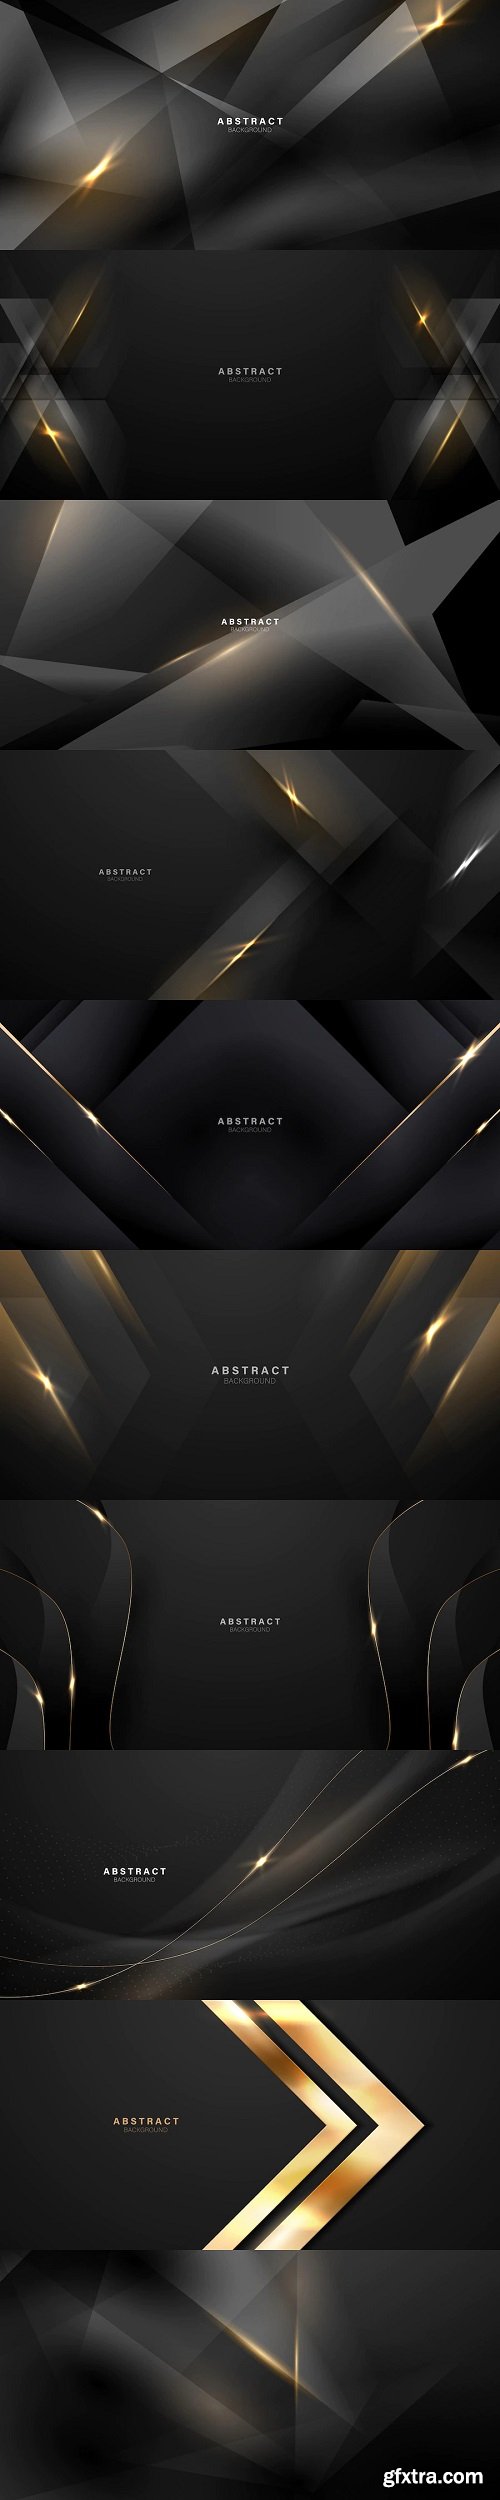 Vector abstract luxury black background with golden elements